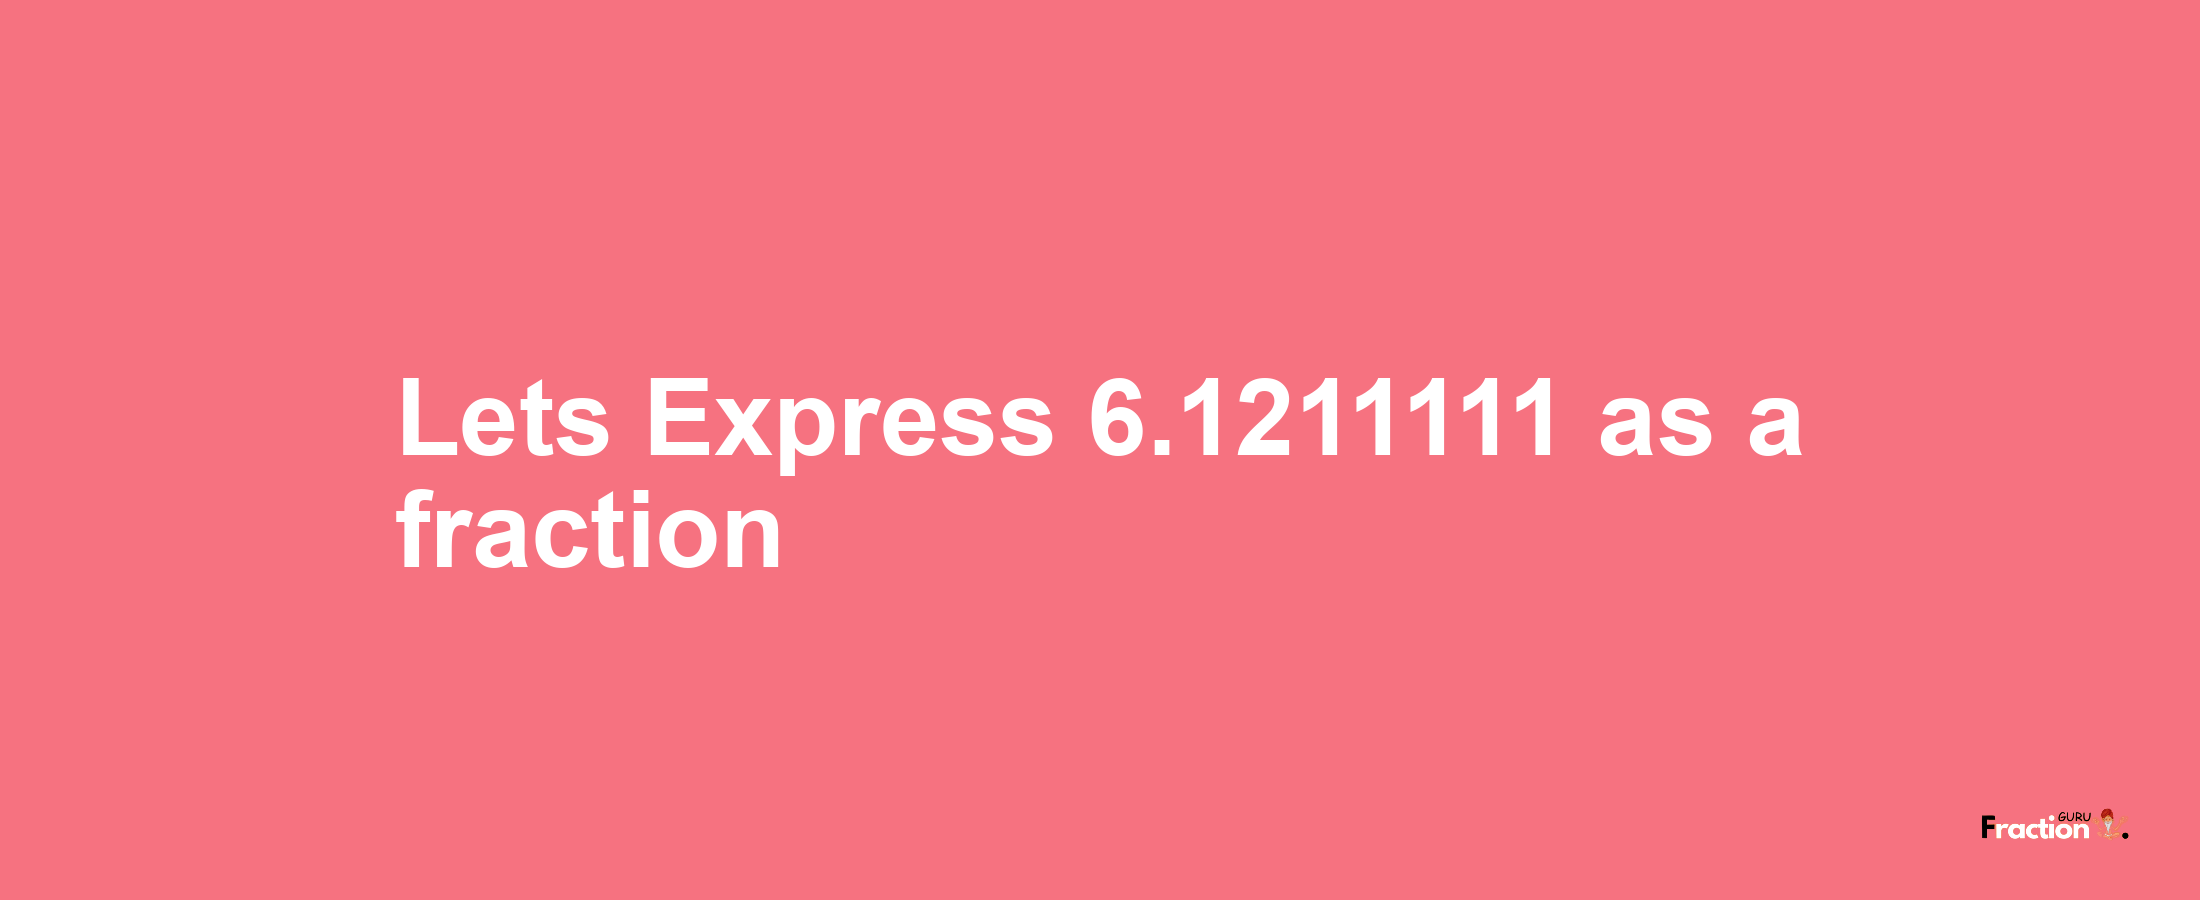 Lets Express 6.1211111 as afraction